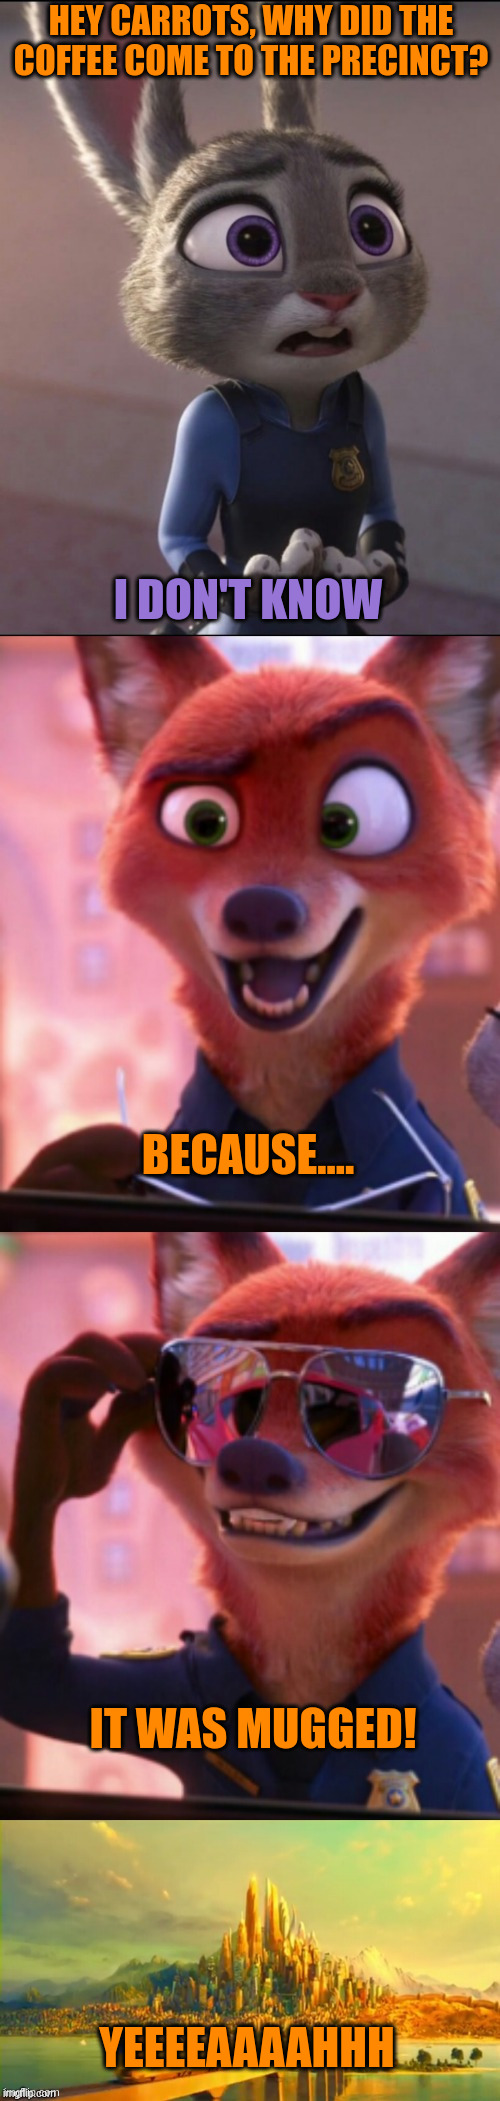 CSI Zootopia 49 | HEY CARROTS, WHY DID THE COFFEE COME TO THE PRECINCT? I DON'T KNOW; BECAUSE.... IT WAS MUGGED! YEEEEAAAAHHH | image tagged in csi zootopia | made w/ Imgflip meme maker